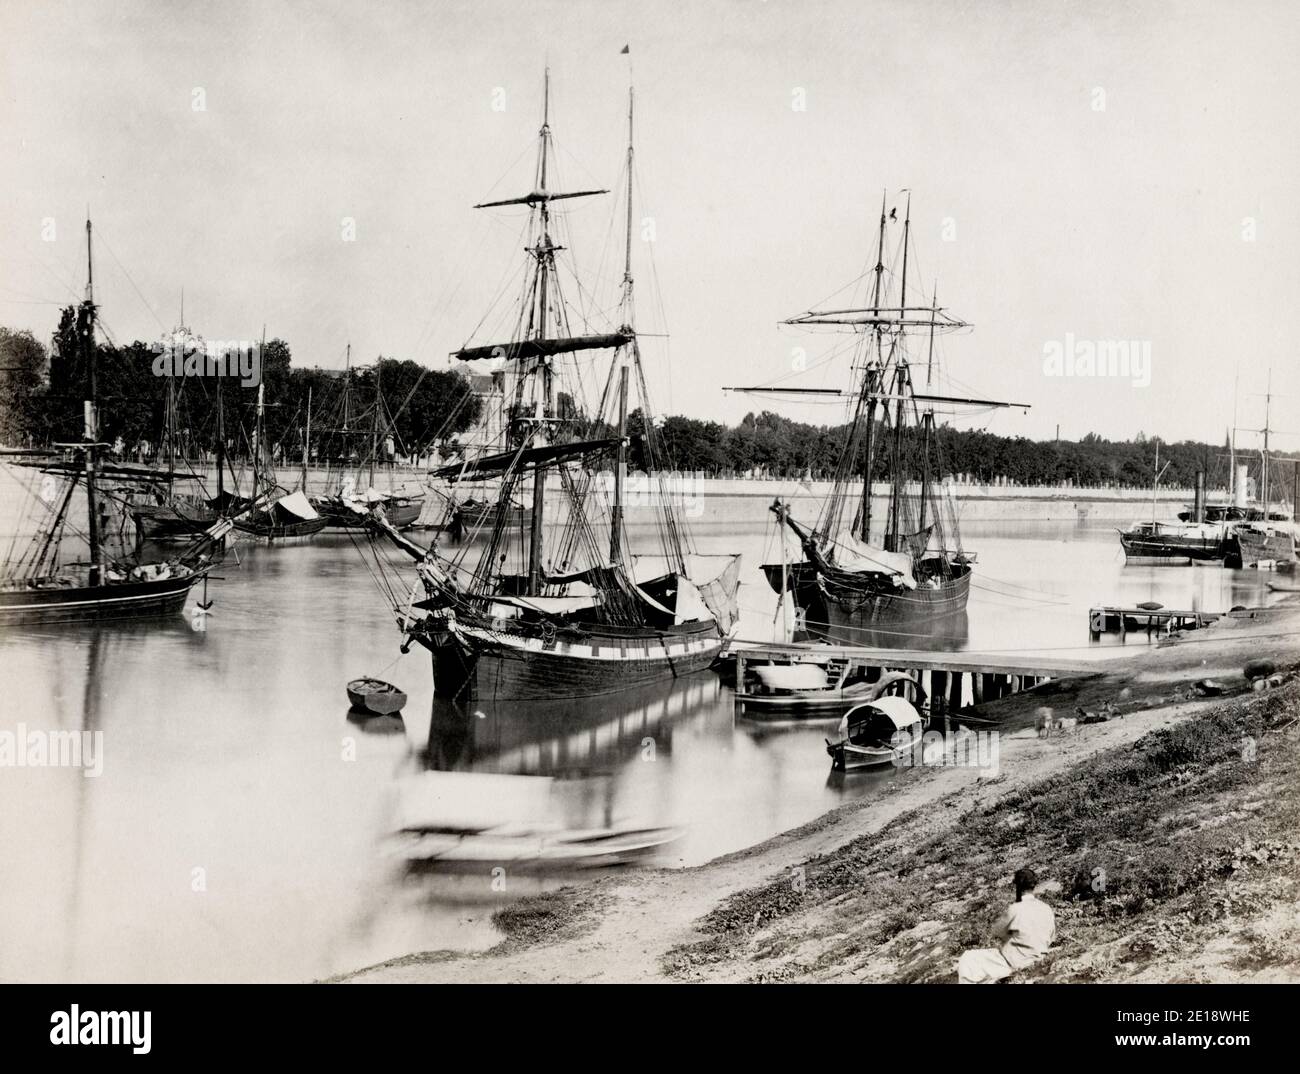 Vintage 19th century photograph - ships tied up along the river, Seville, Spain Stock Photo